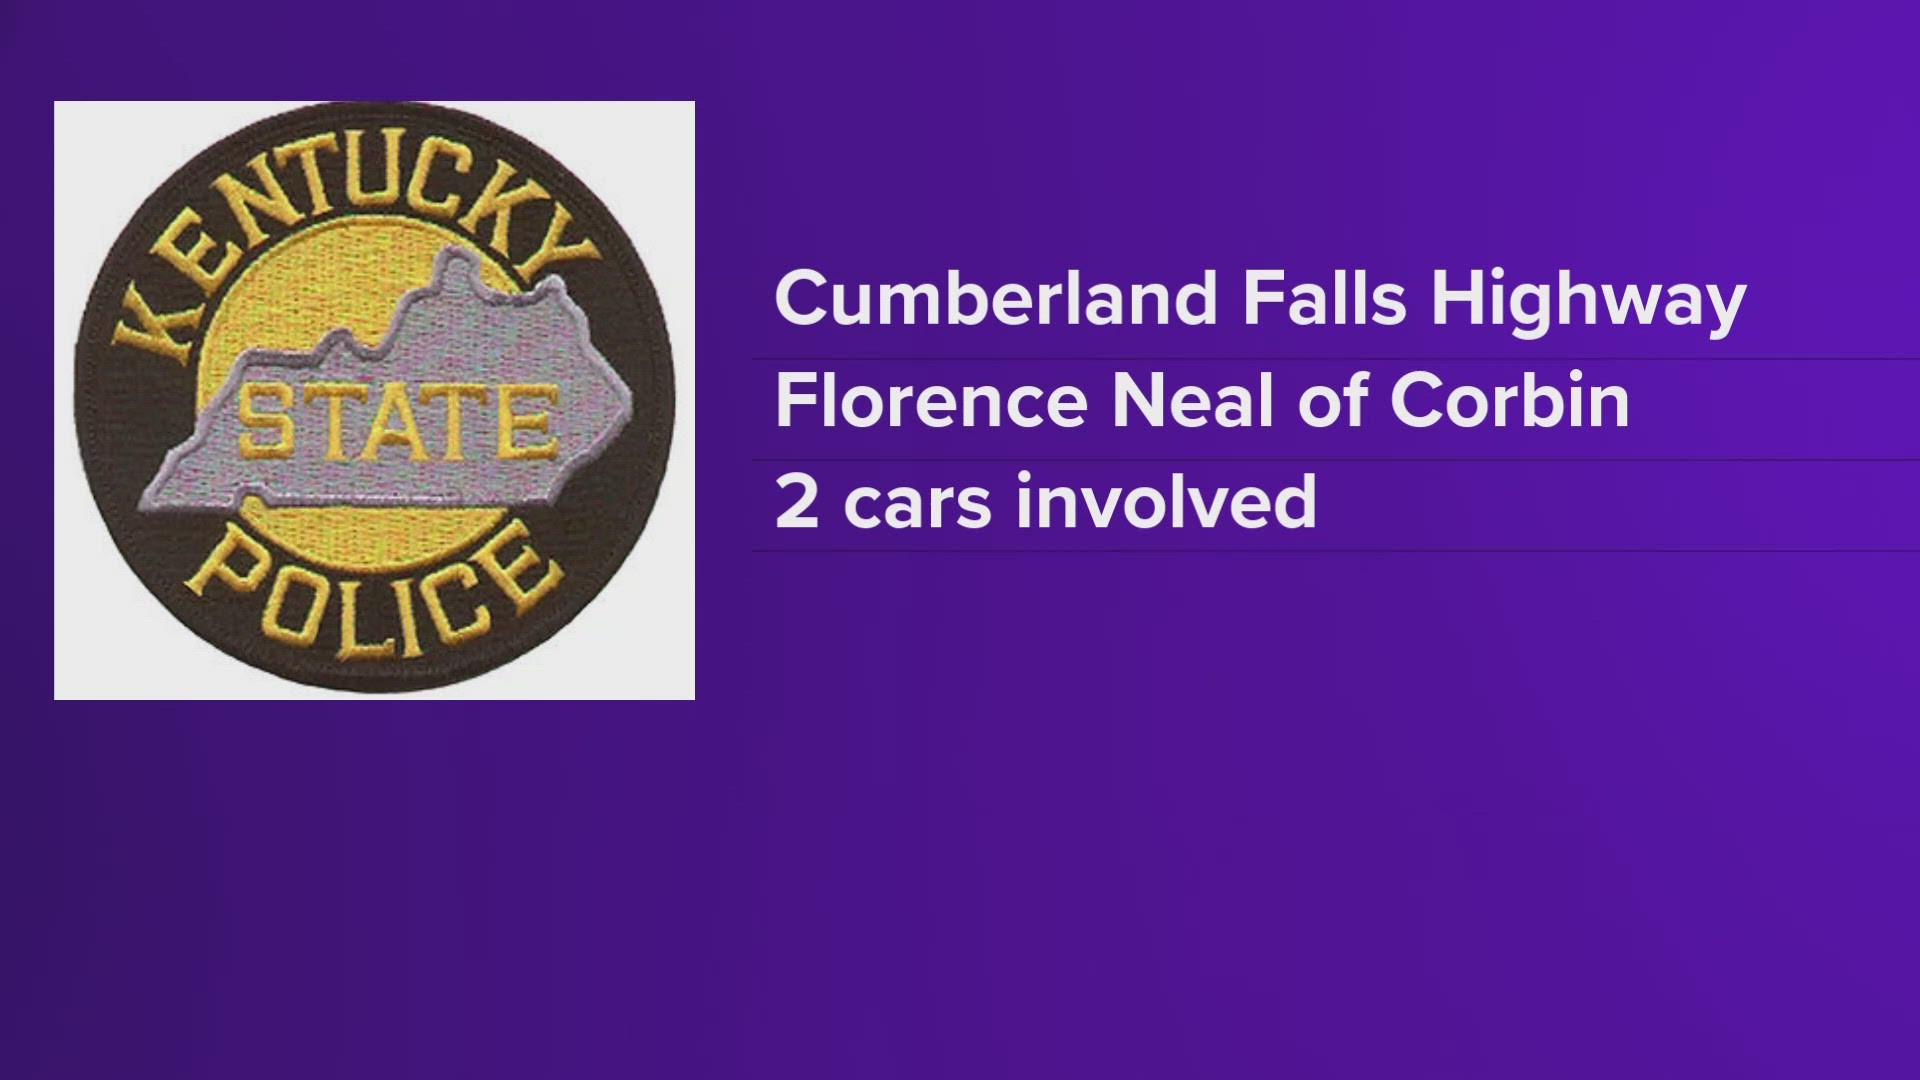 State police said a Jeep turned onto the highway and was struck by a car. One of the car's passengers was Florence Neal, who was pronounced dead at the scene.